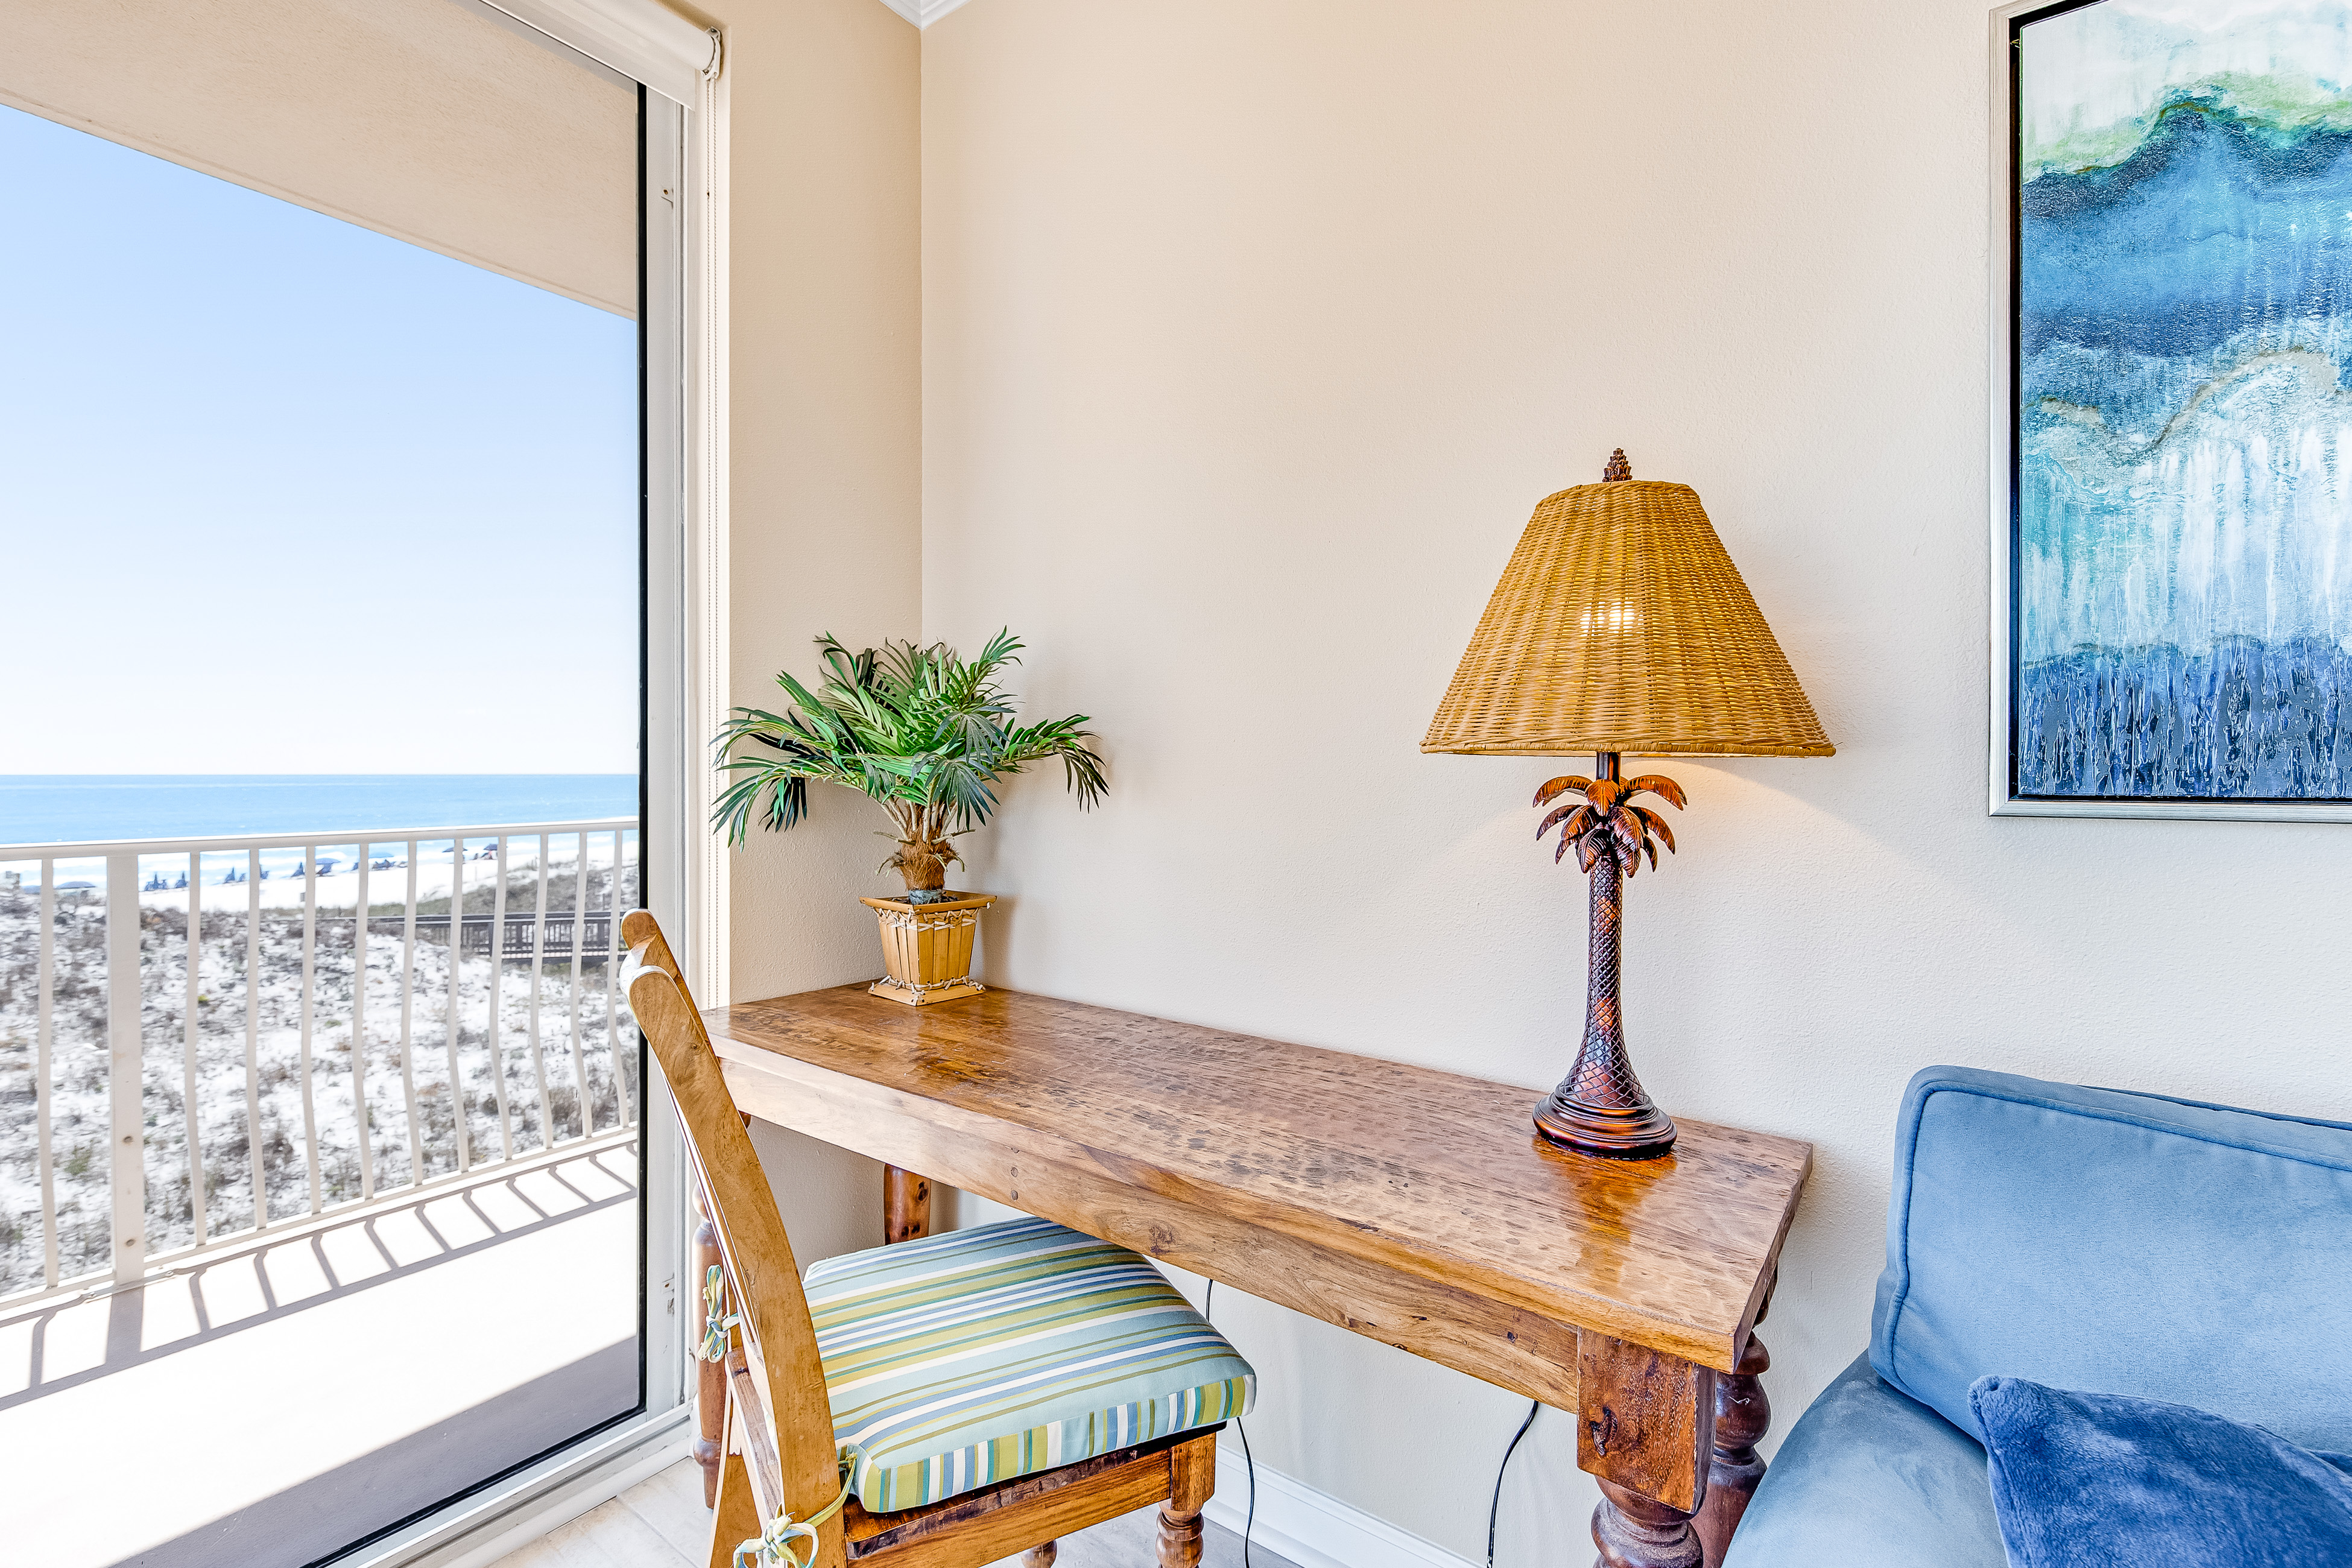 Dunes of Seagrove A210 Condo rental in Dunes of Seagrove in Highway 30-A Florida - #5